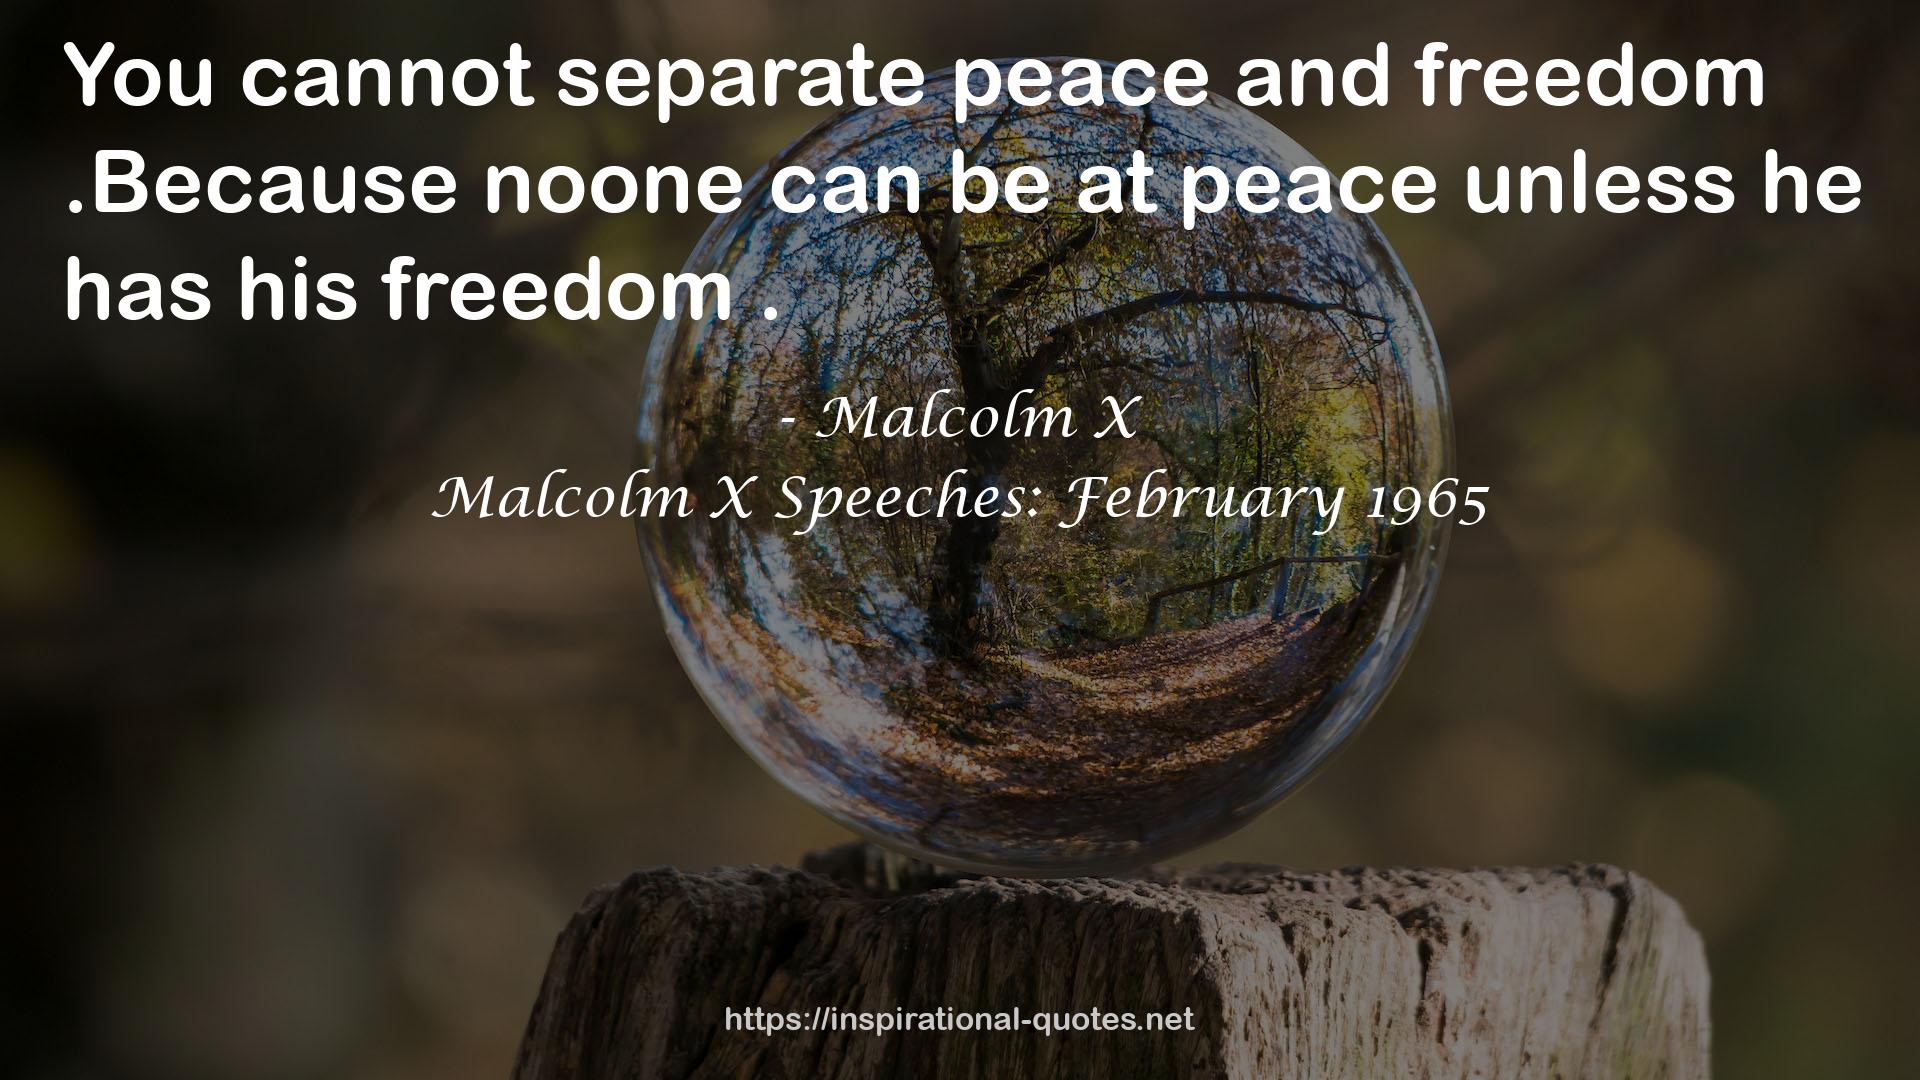 Malcolm X Speeches: February 1965 QUOTES